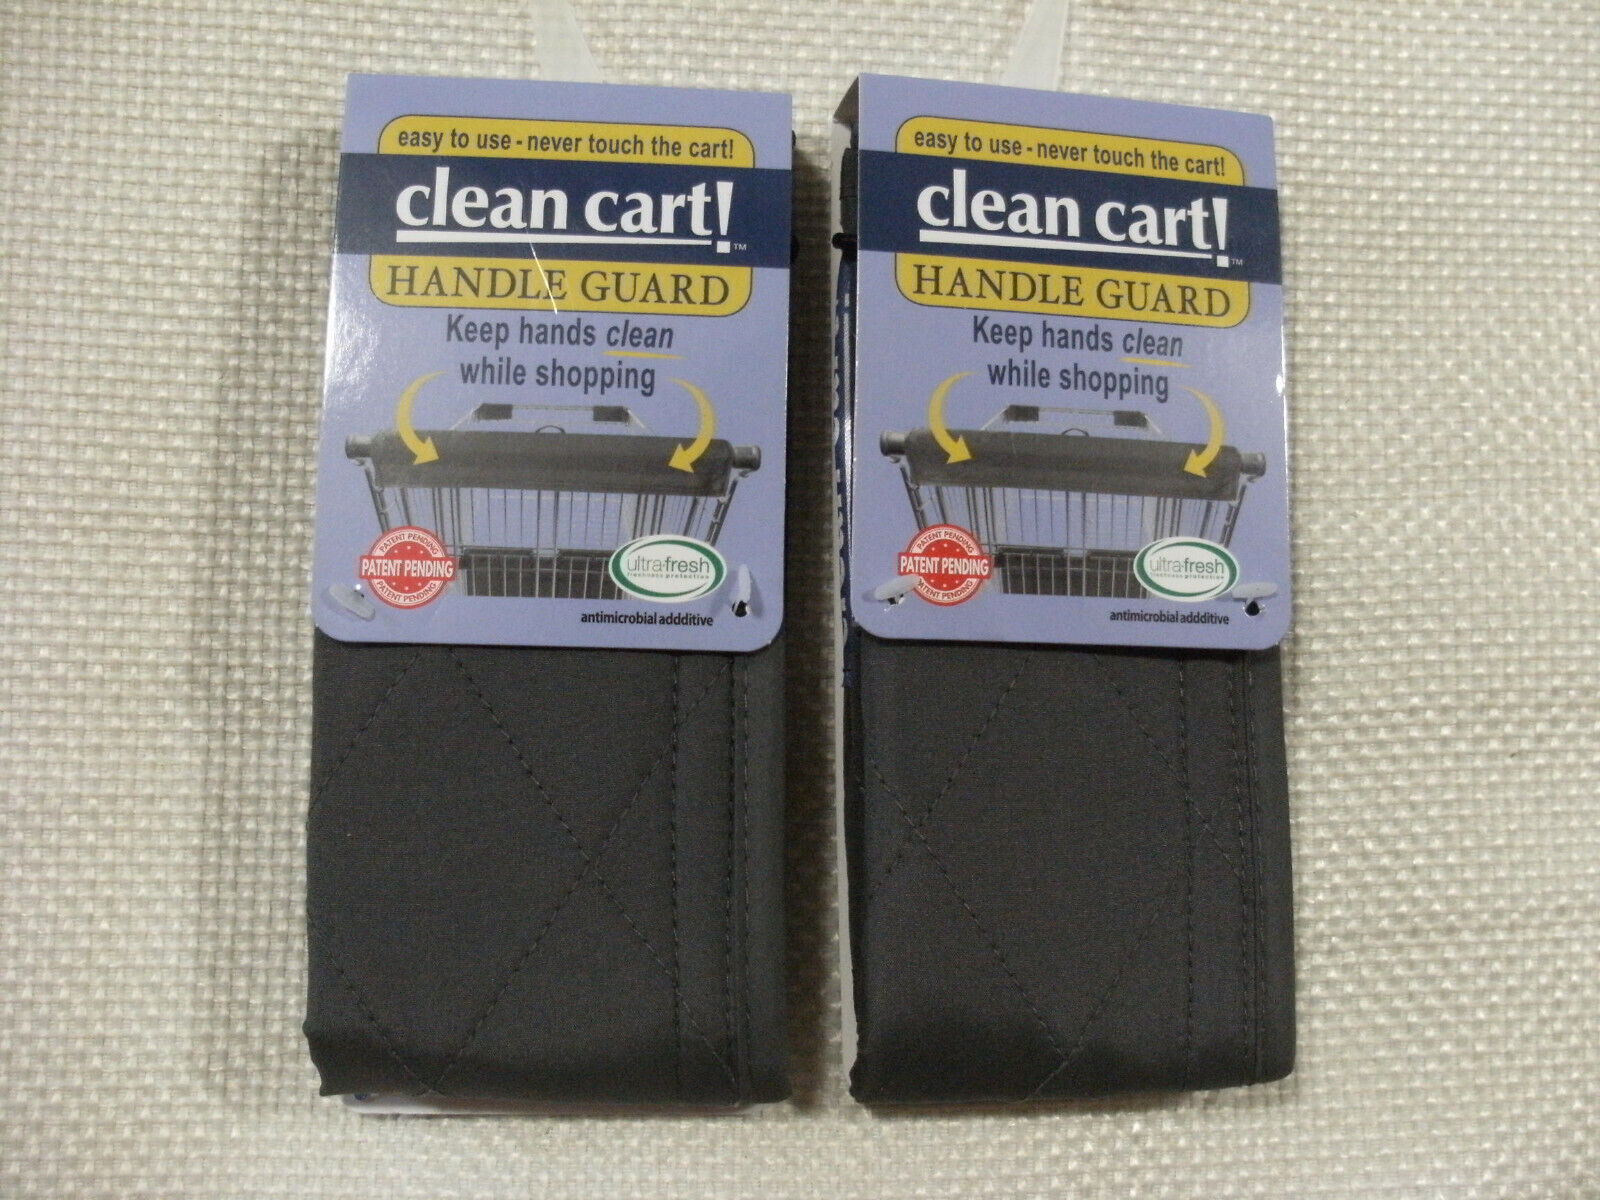 (2) GRAY Clean Shopping Cart Handle Guard Reusable Cover Sanitary Washable Wipe Clean Cart MAN-789-XX-GRAY-E4